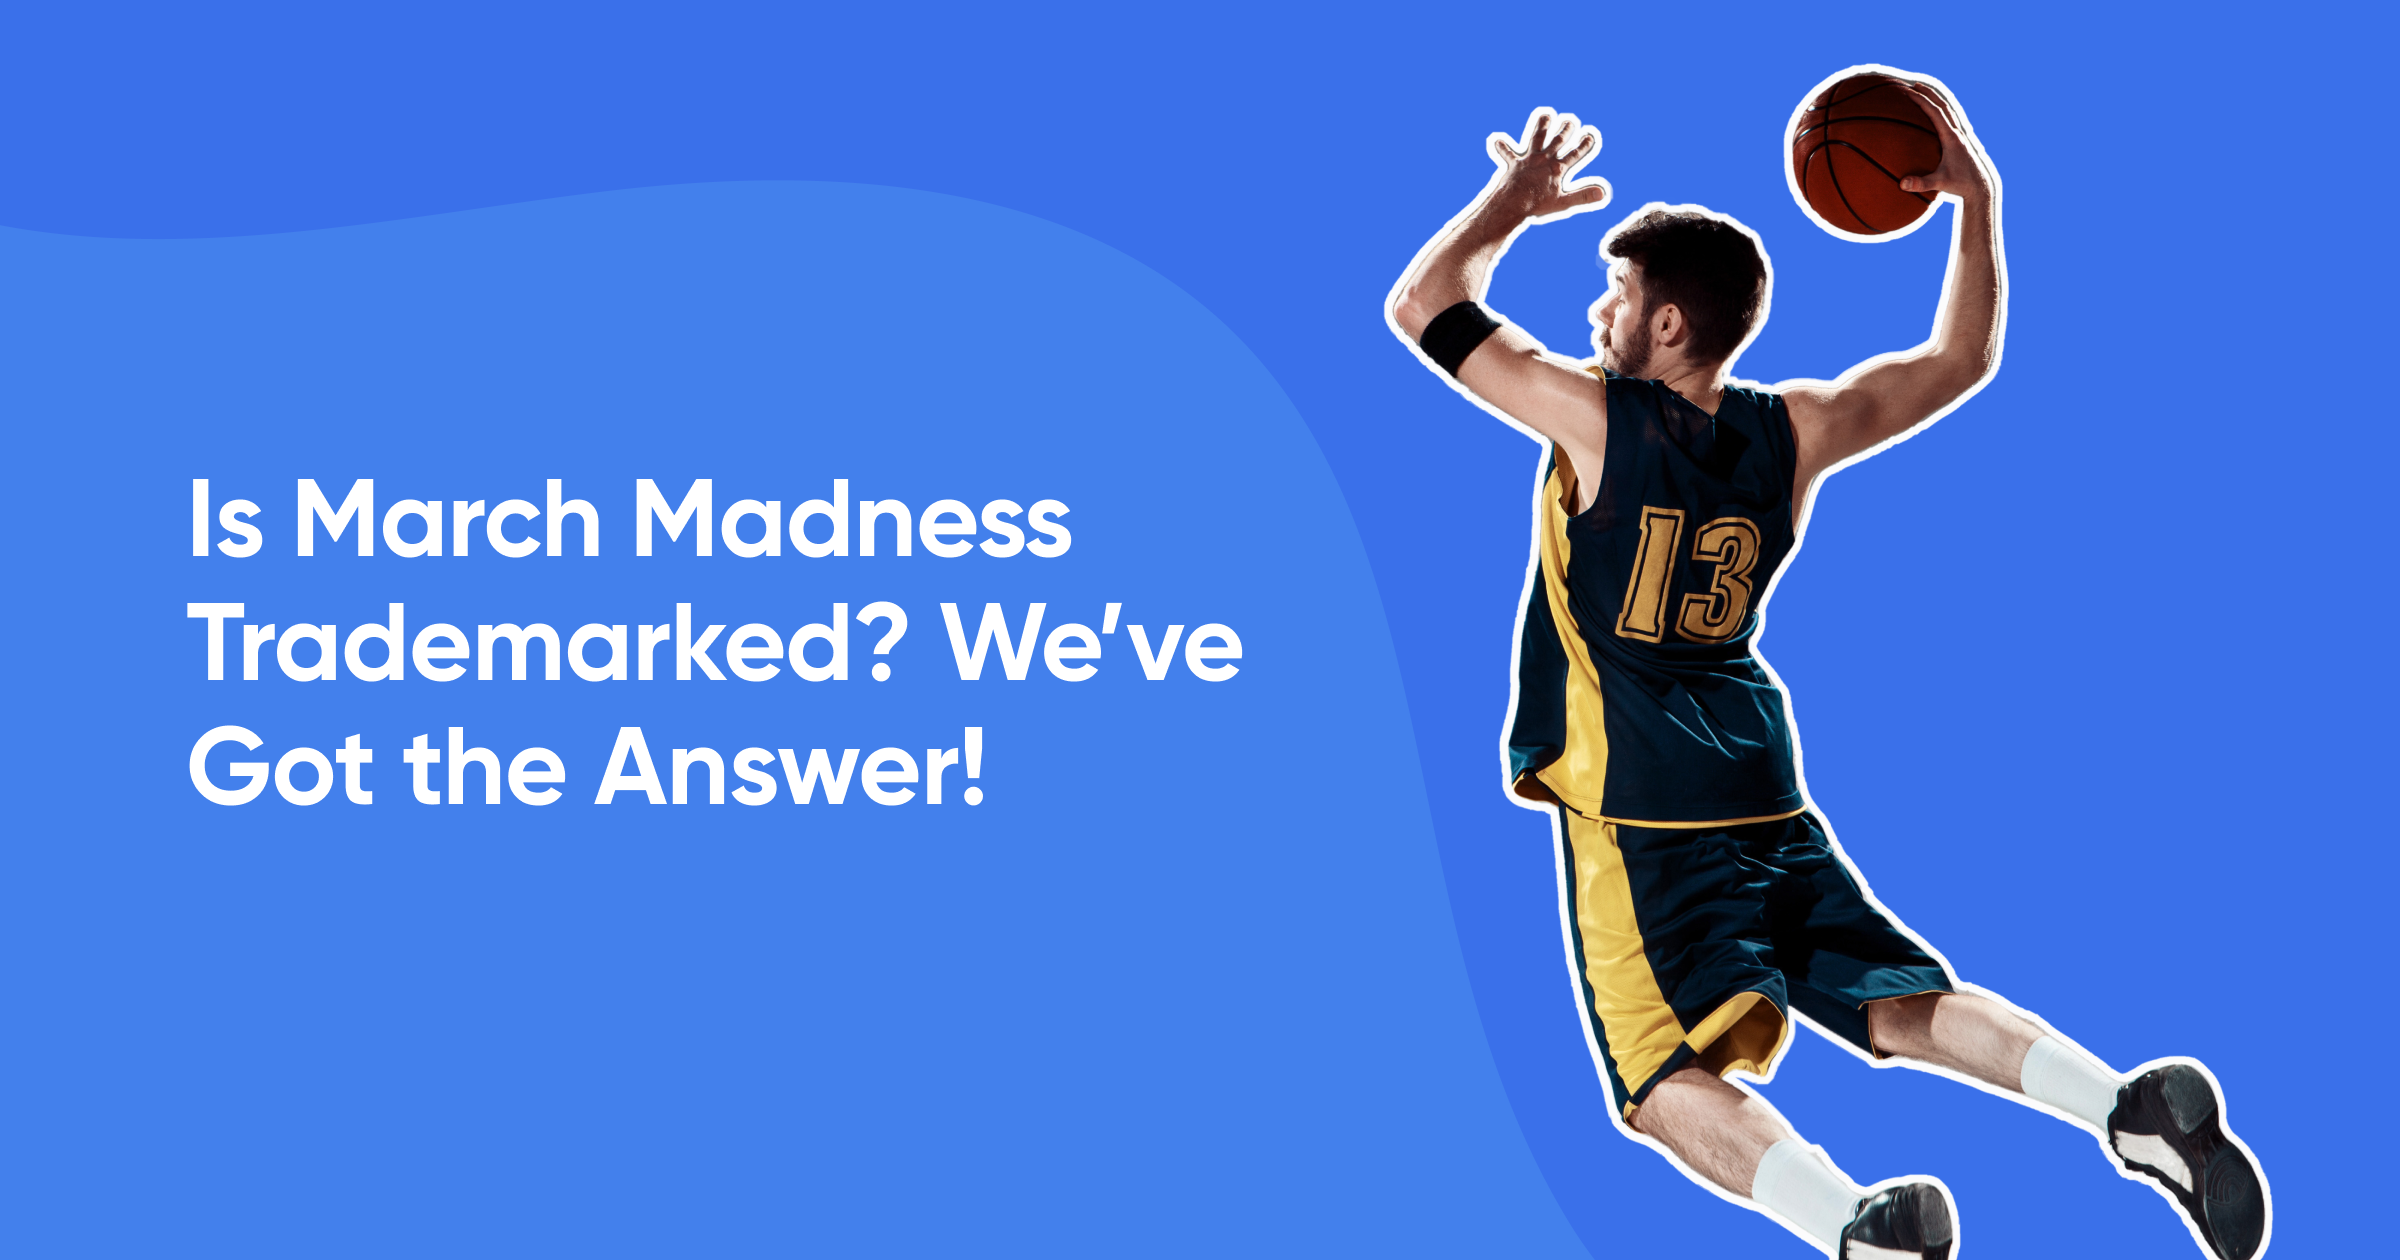  Is March Madness Trademarked? We’ve Got the Answer!